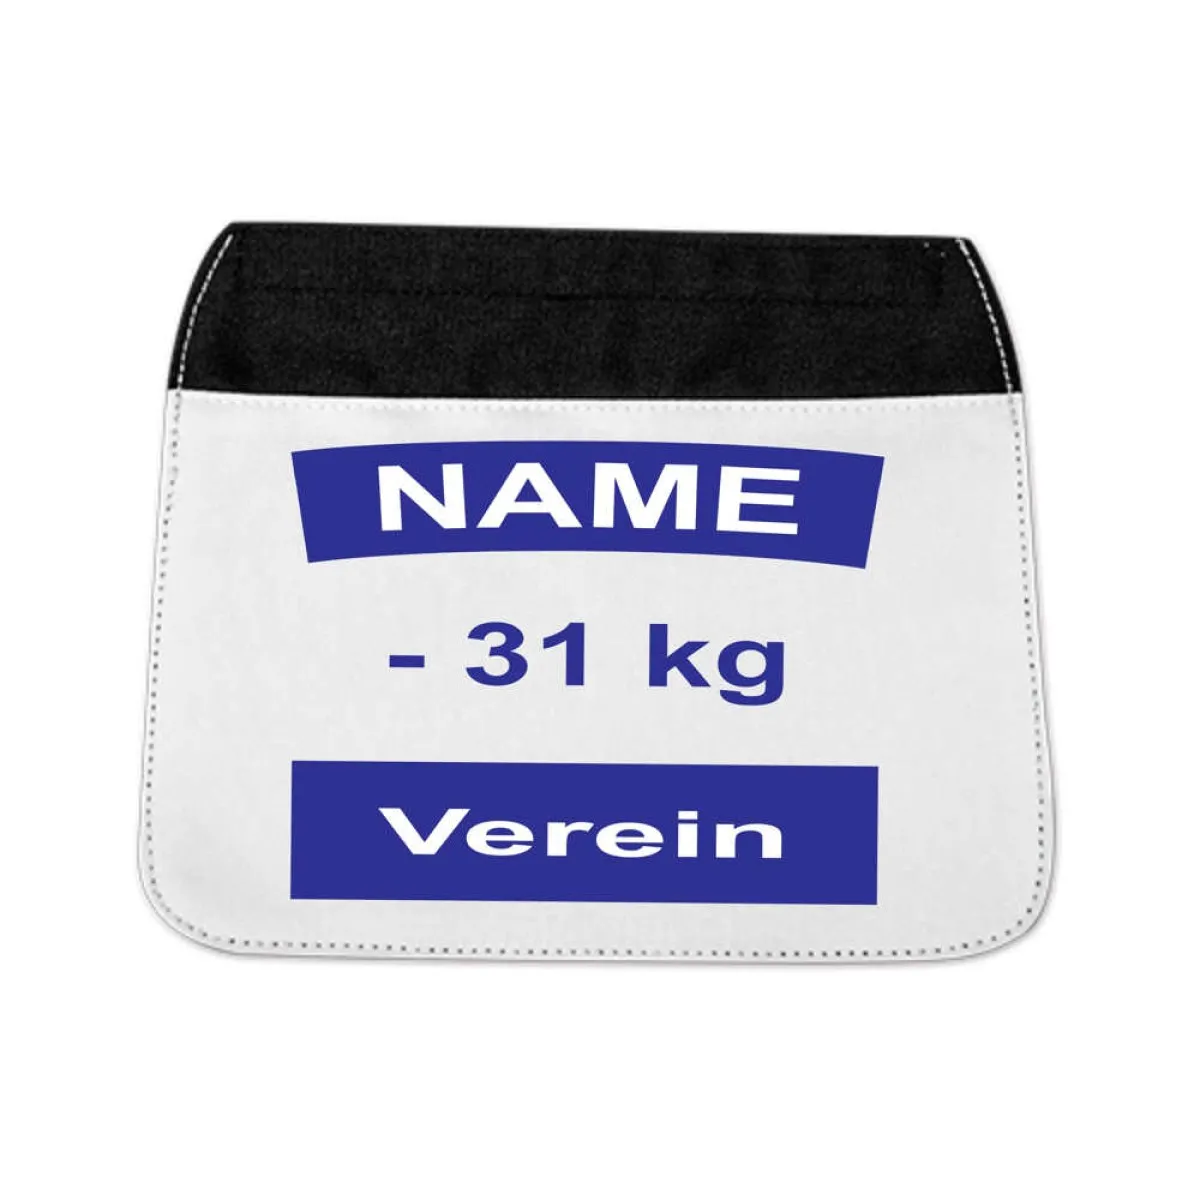 Replacement flap for sports bag with judo back number side